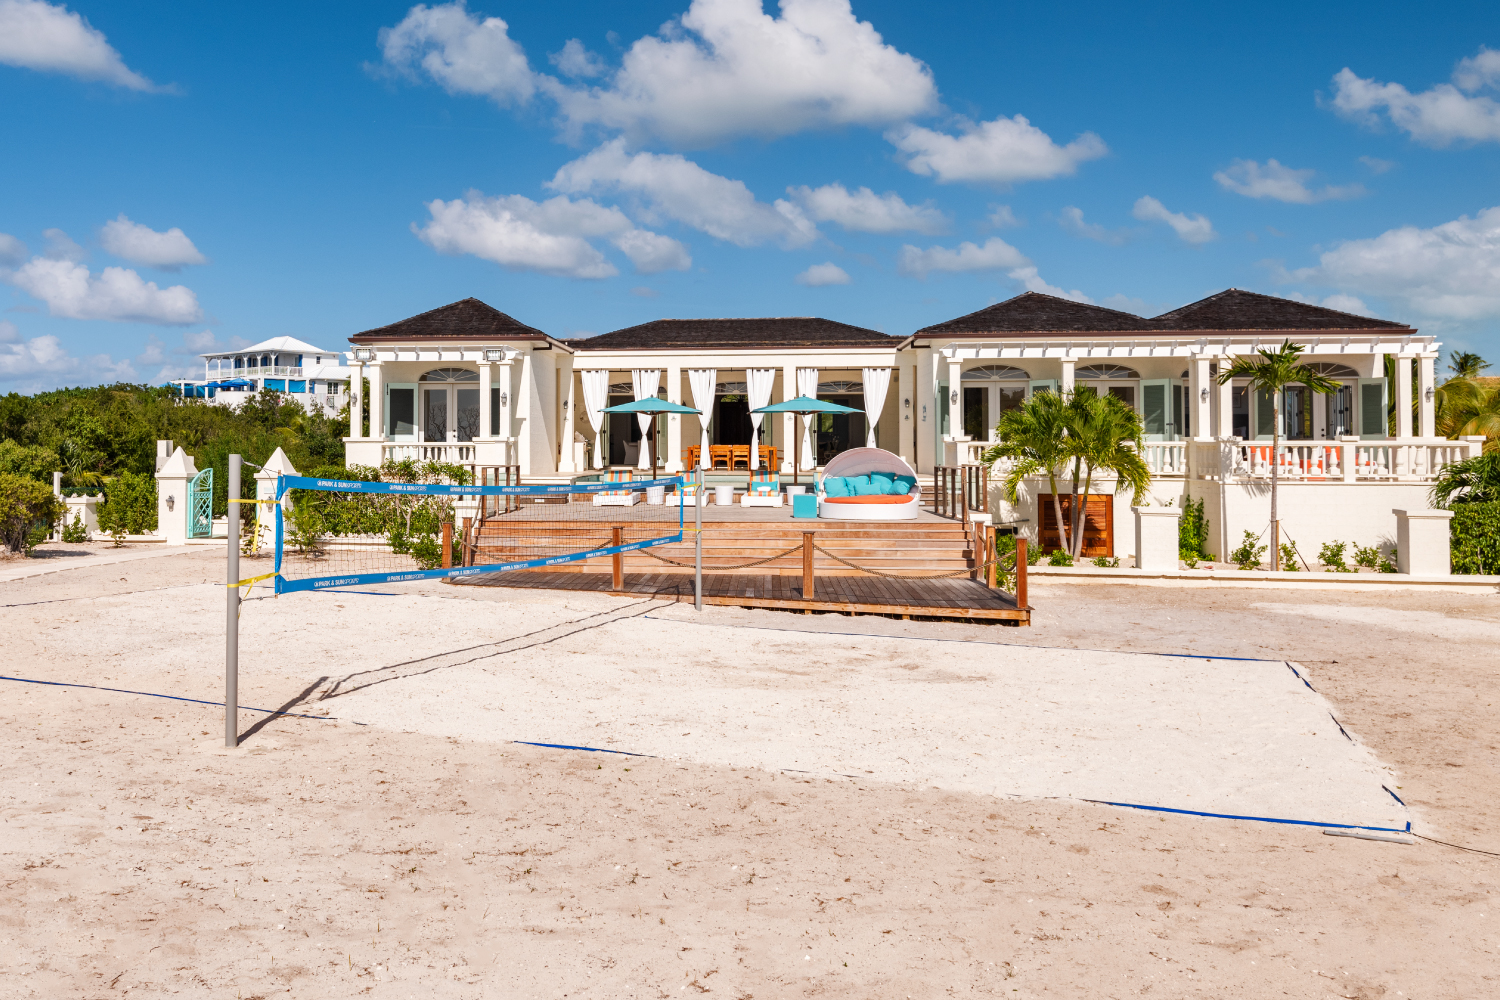 Sand volleyball court for you & your guests to enjoy